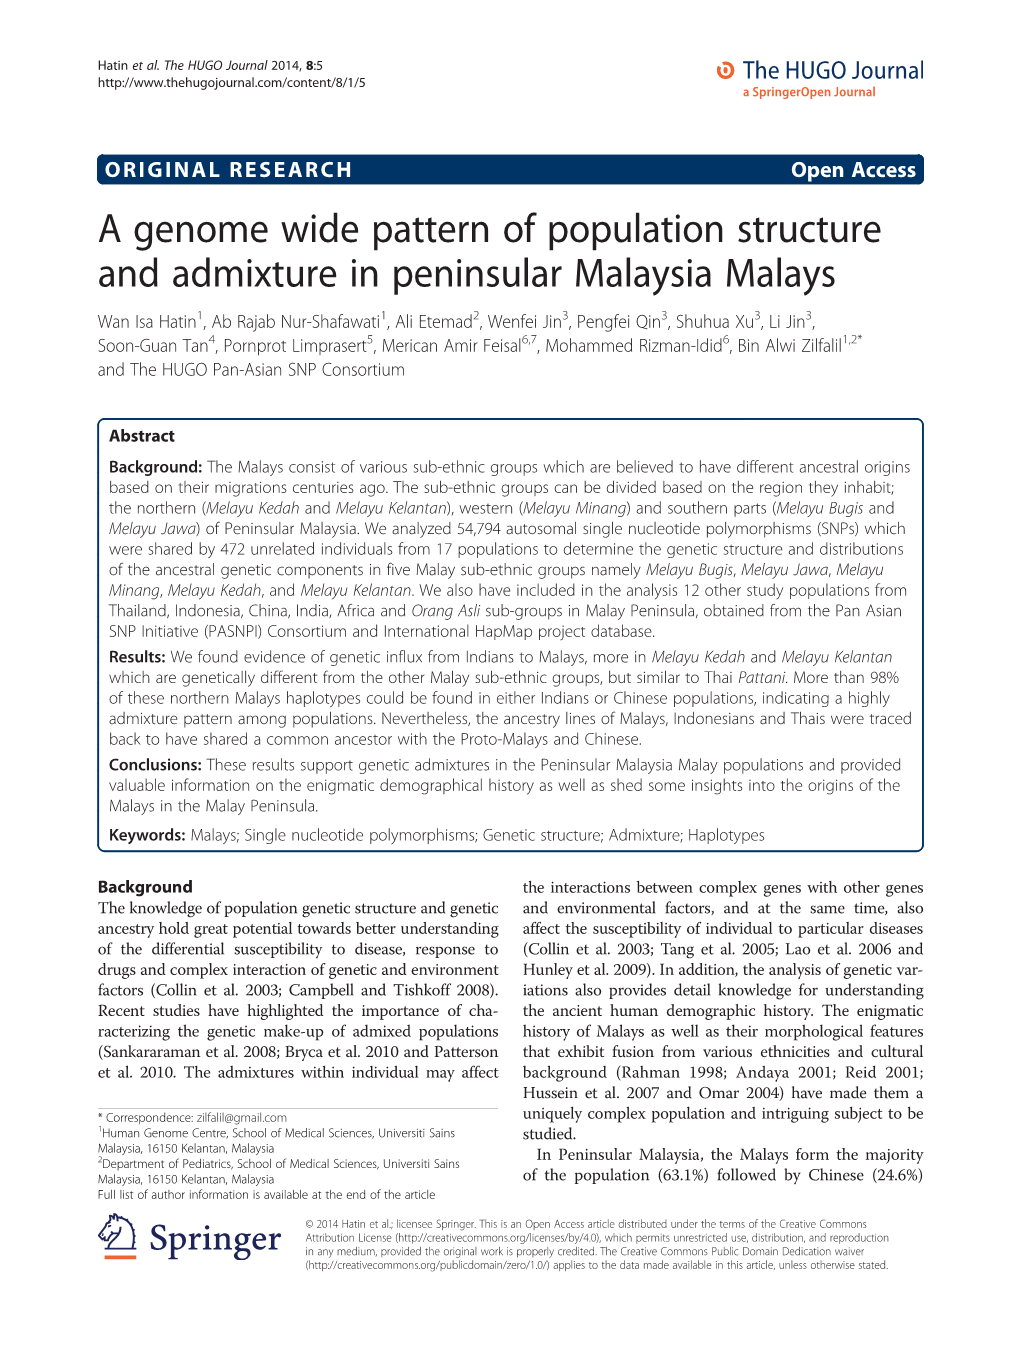 A Genome Wide Pattern of Population Structure and Admixture In